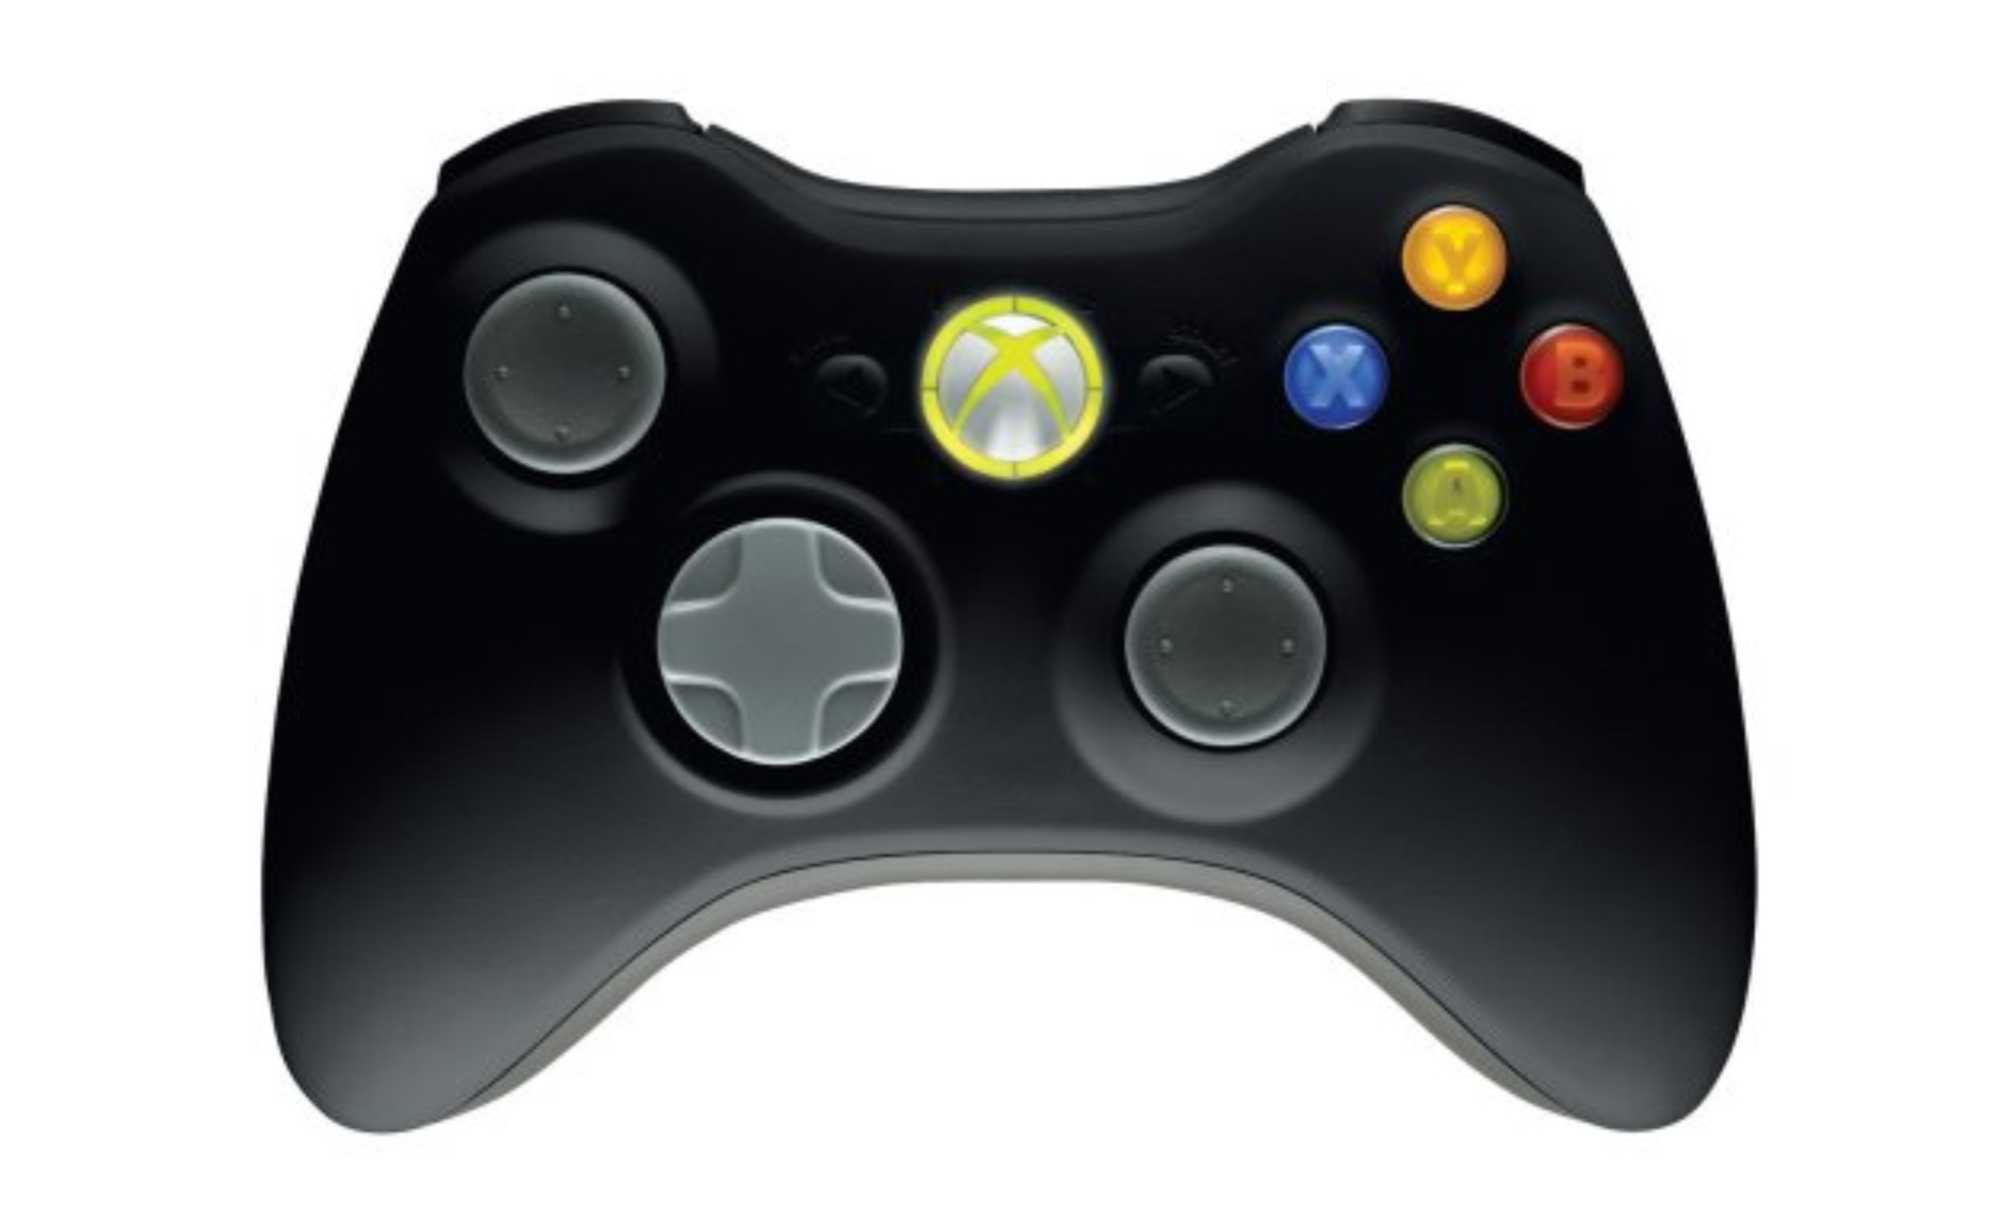 repository with xbox 360 controller drivers